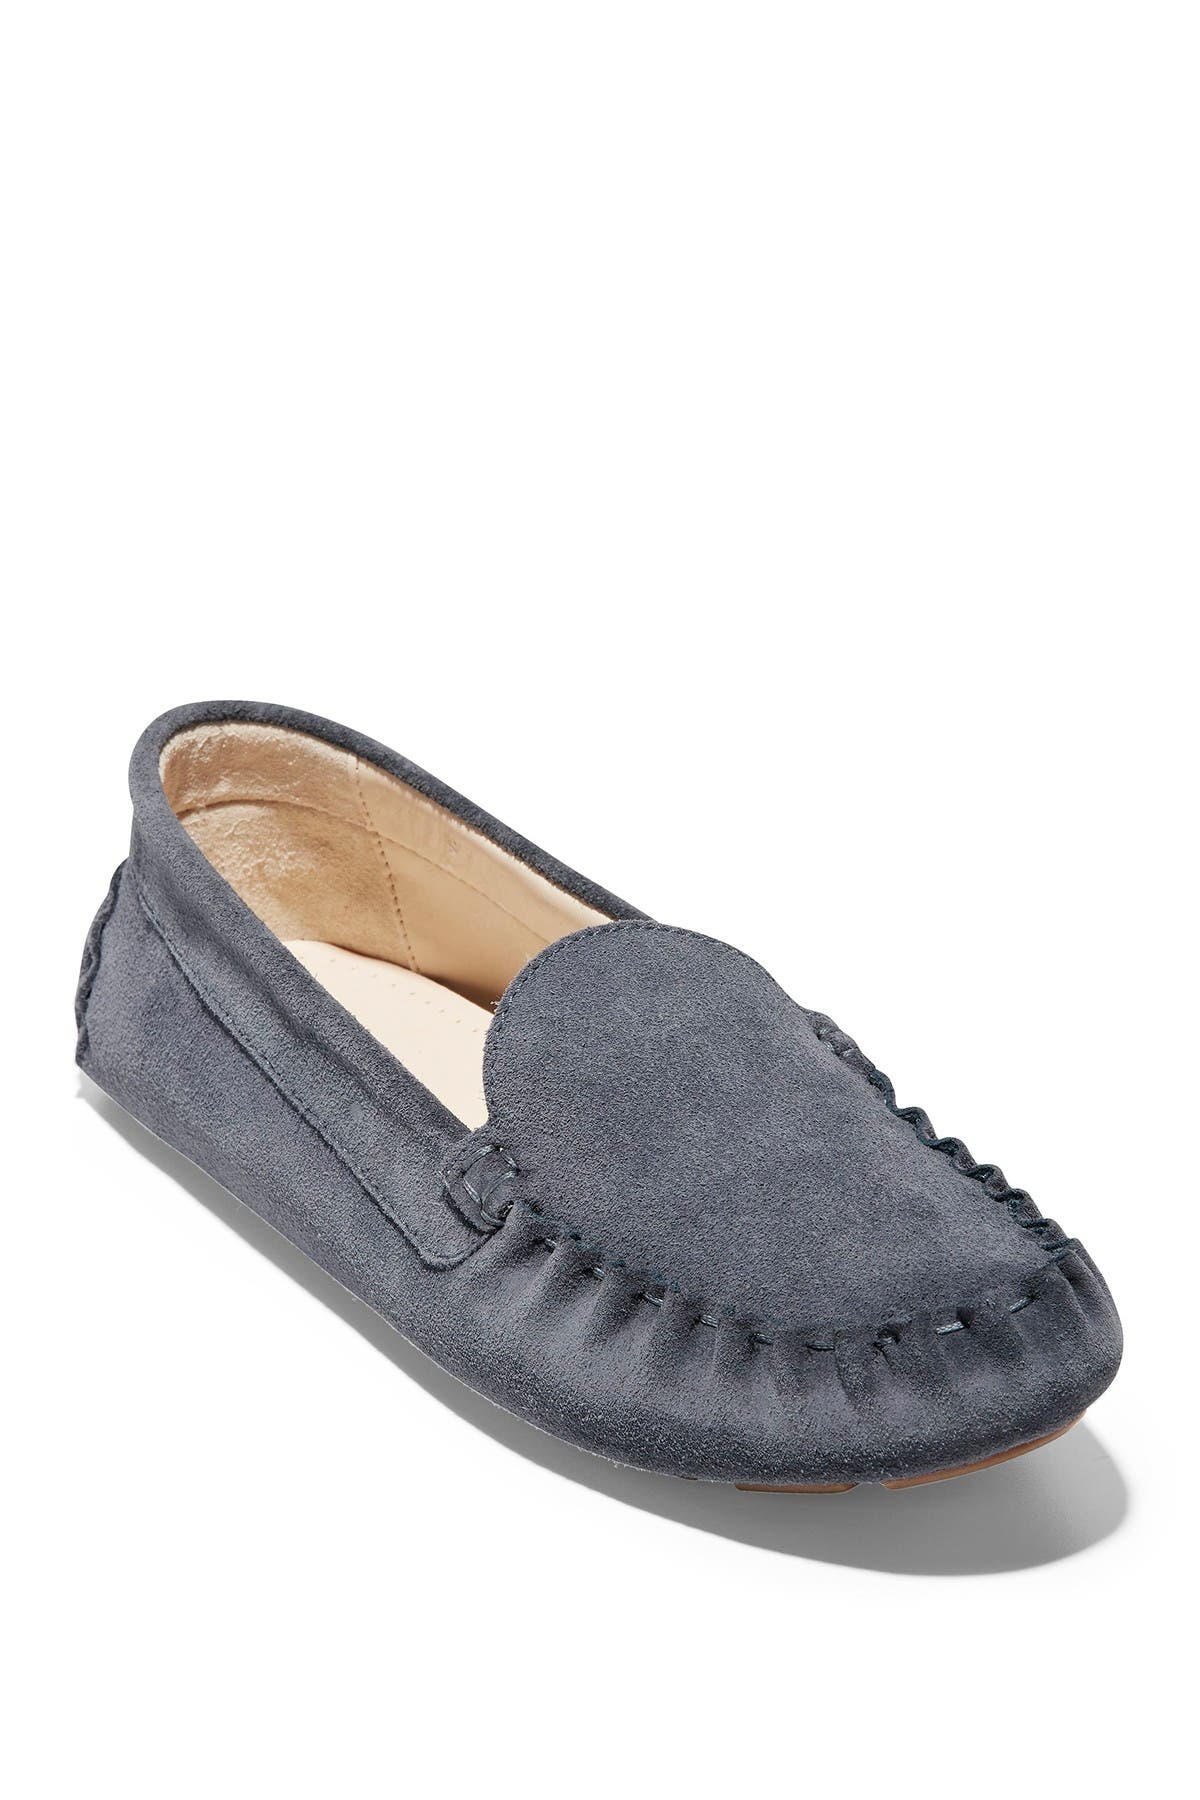 Cole Haan | Evelyn Suede Loafer 